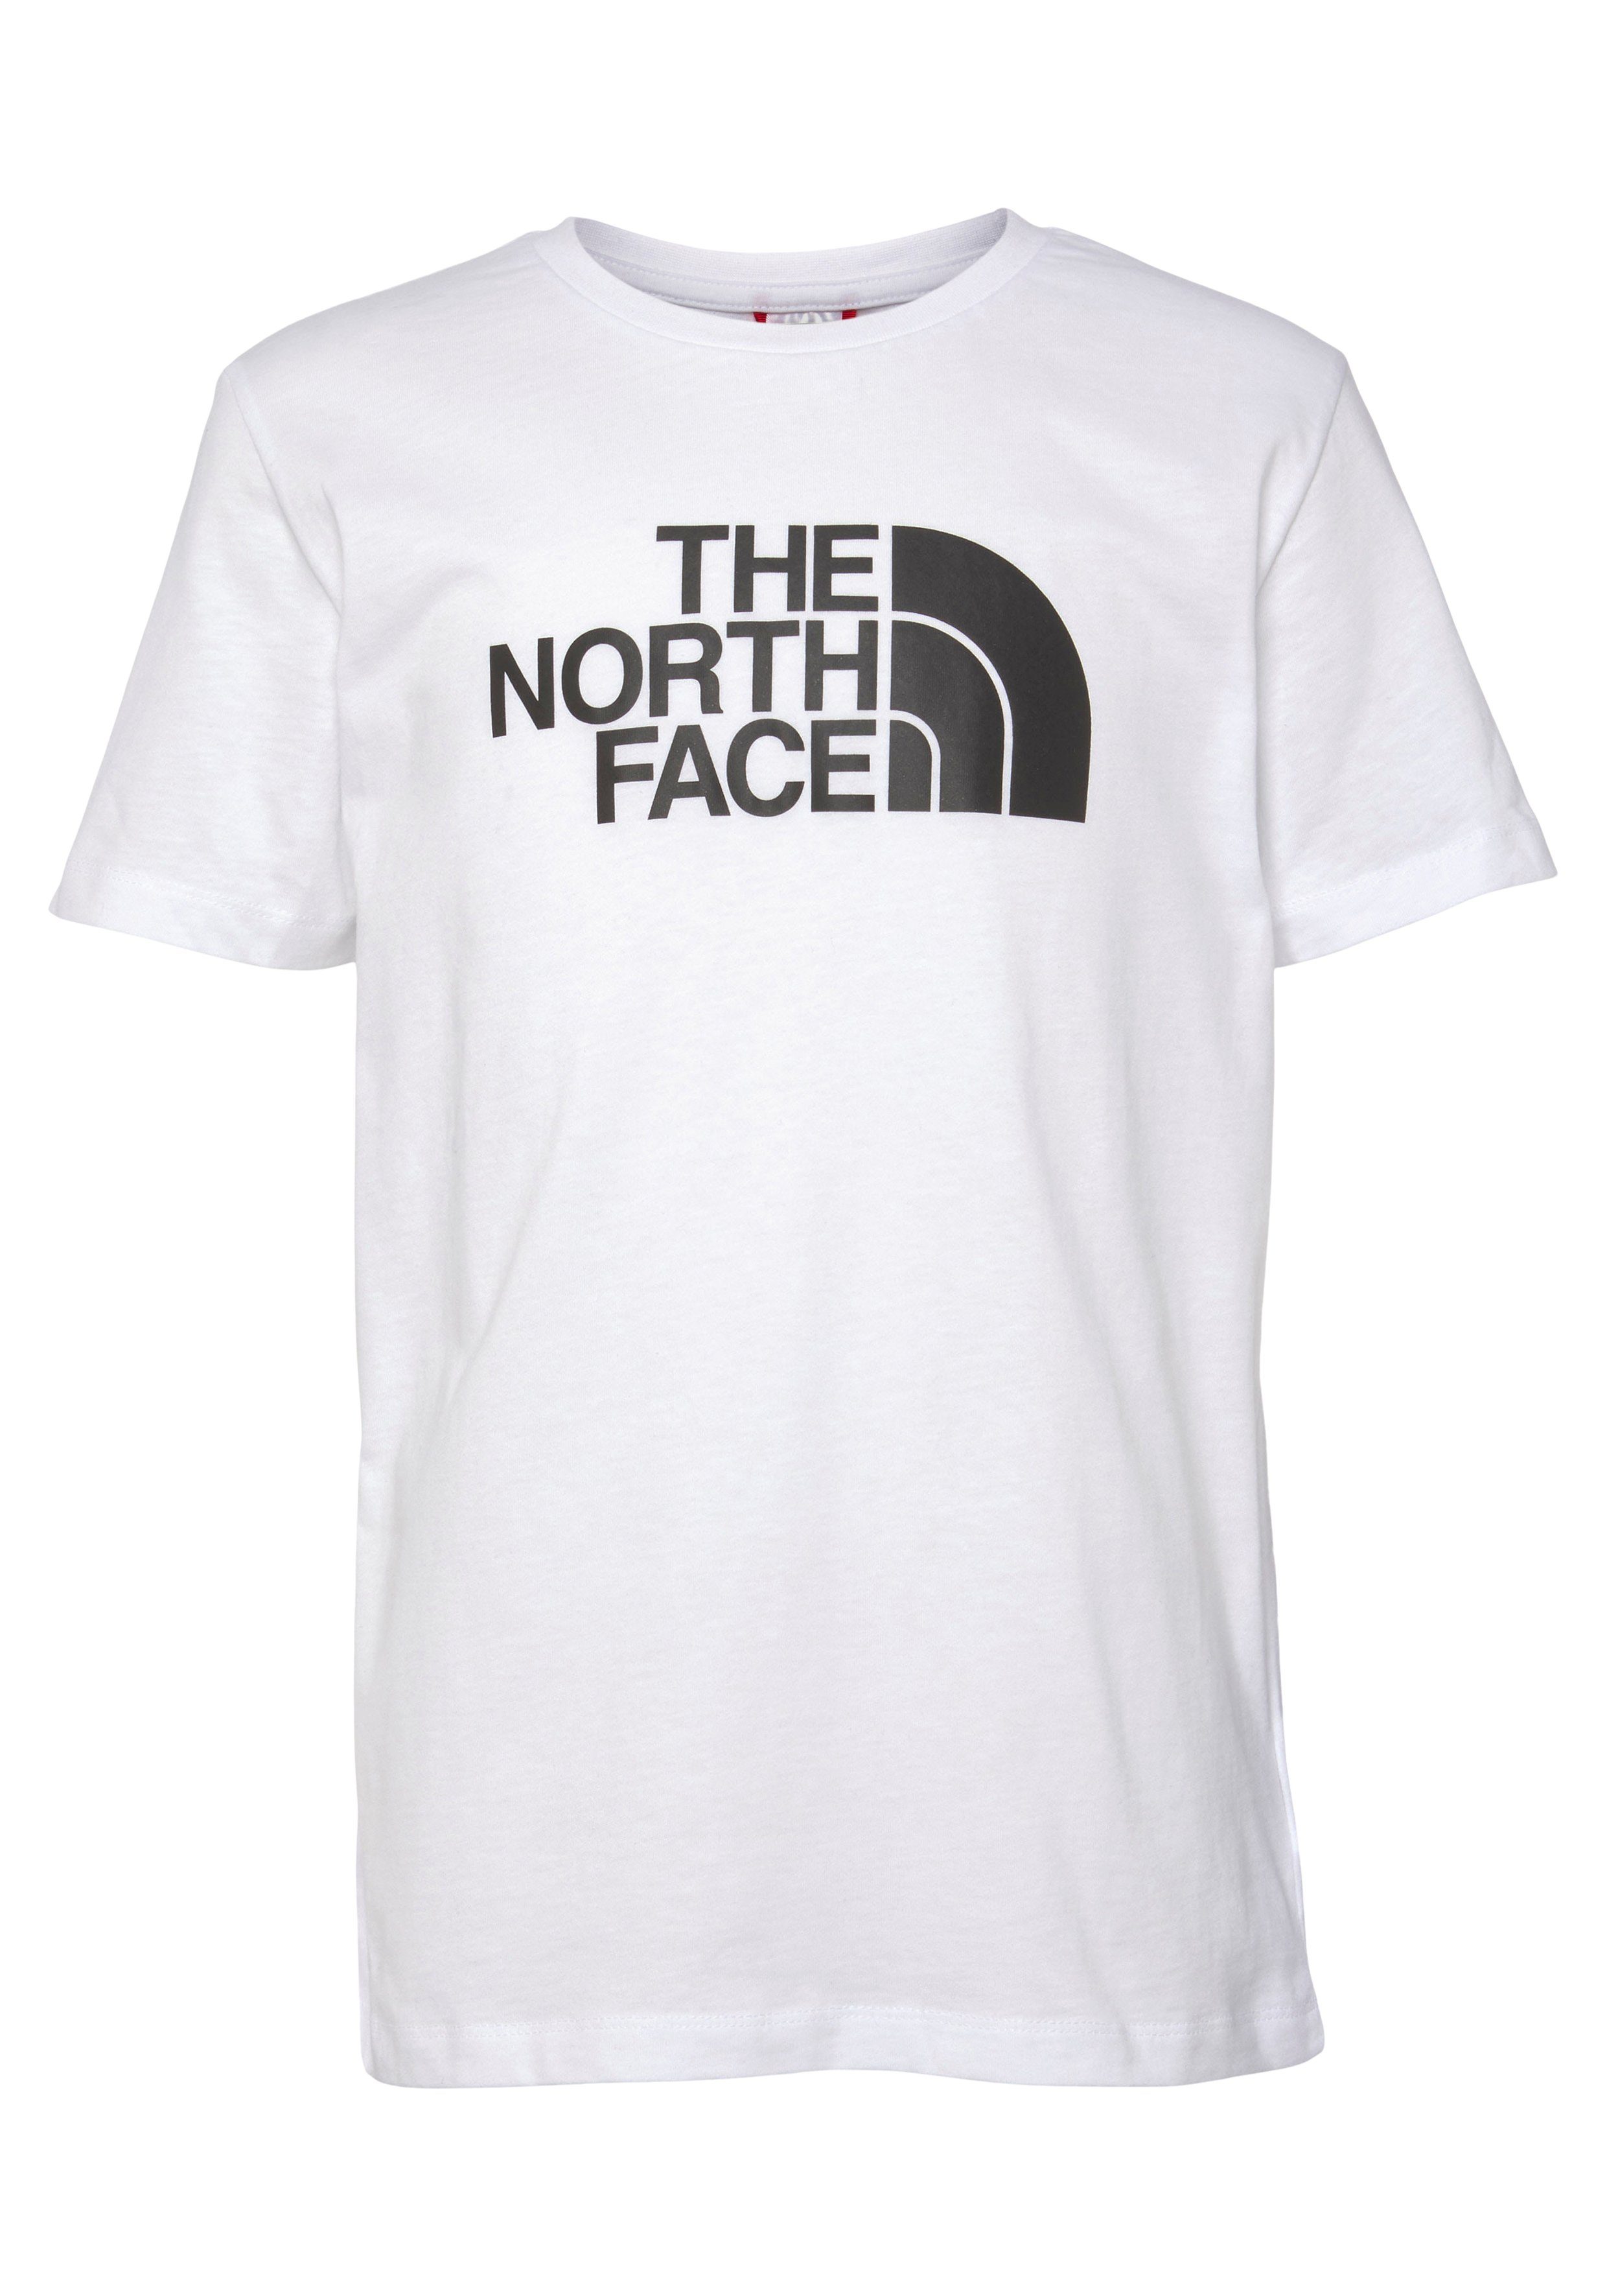 The North Face T-Shirt Kinder - EASY white TEE für